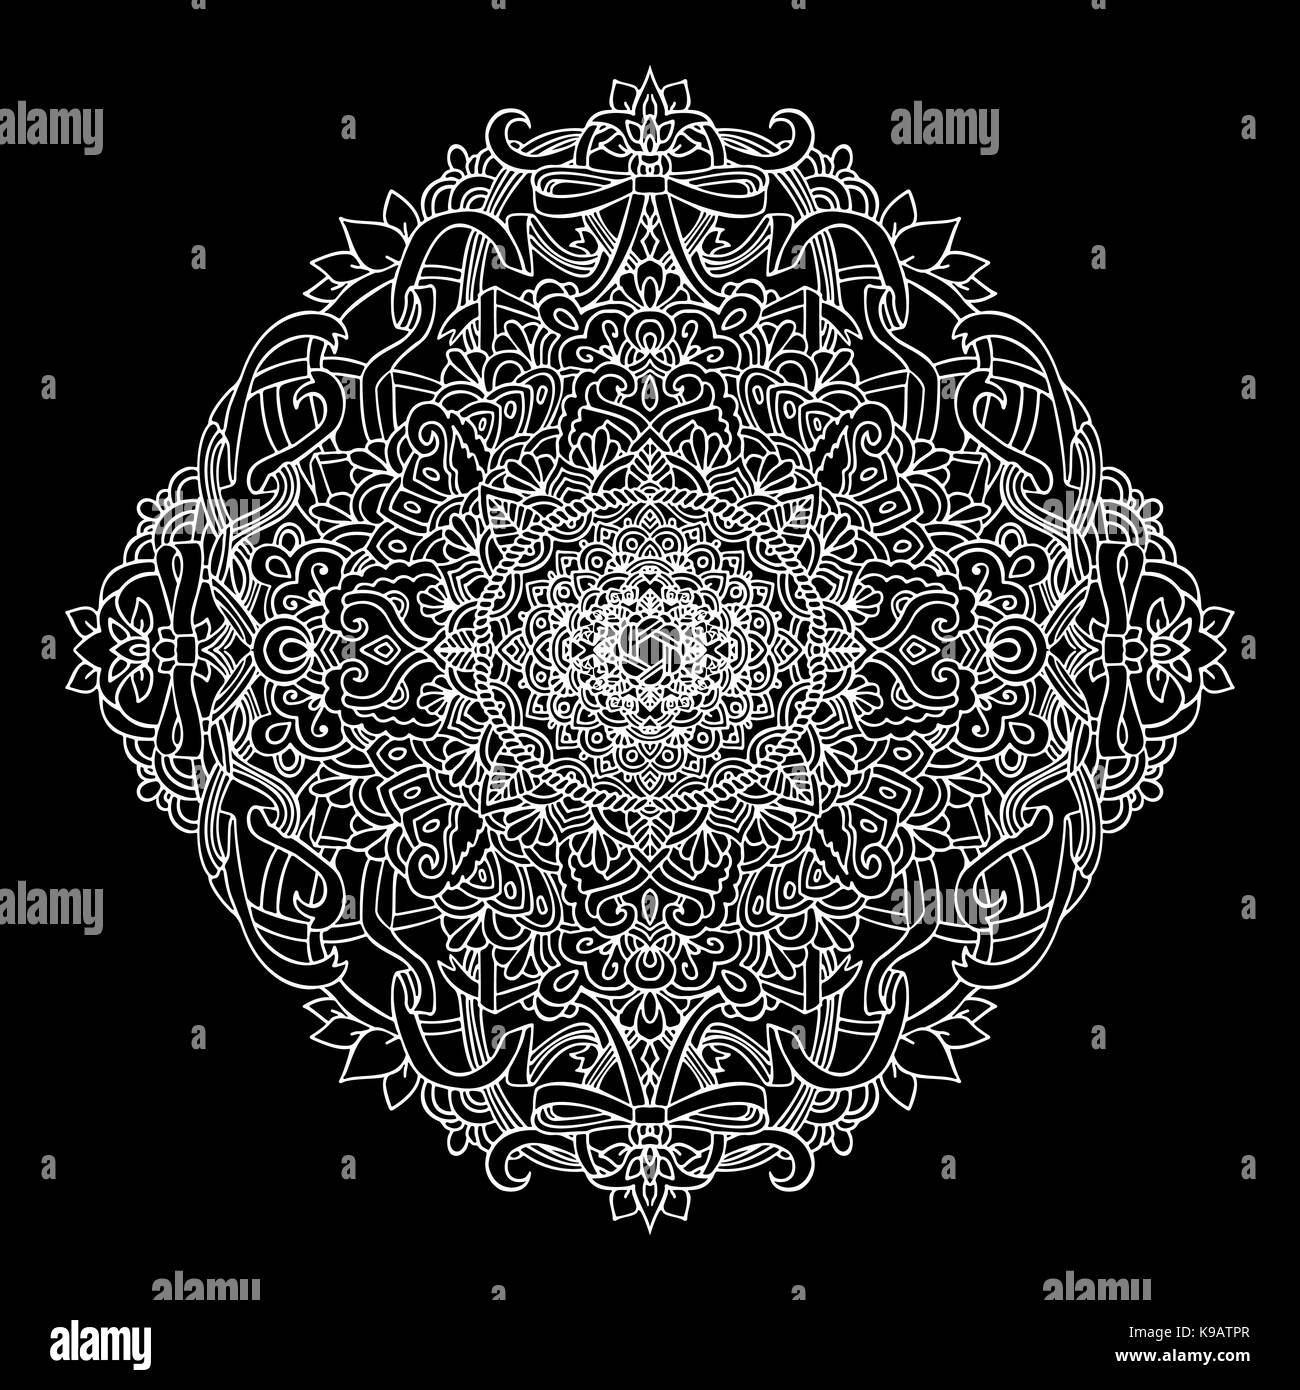 Abstract mandala ornament isolated on black background. Asian pattern. Stock Vector